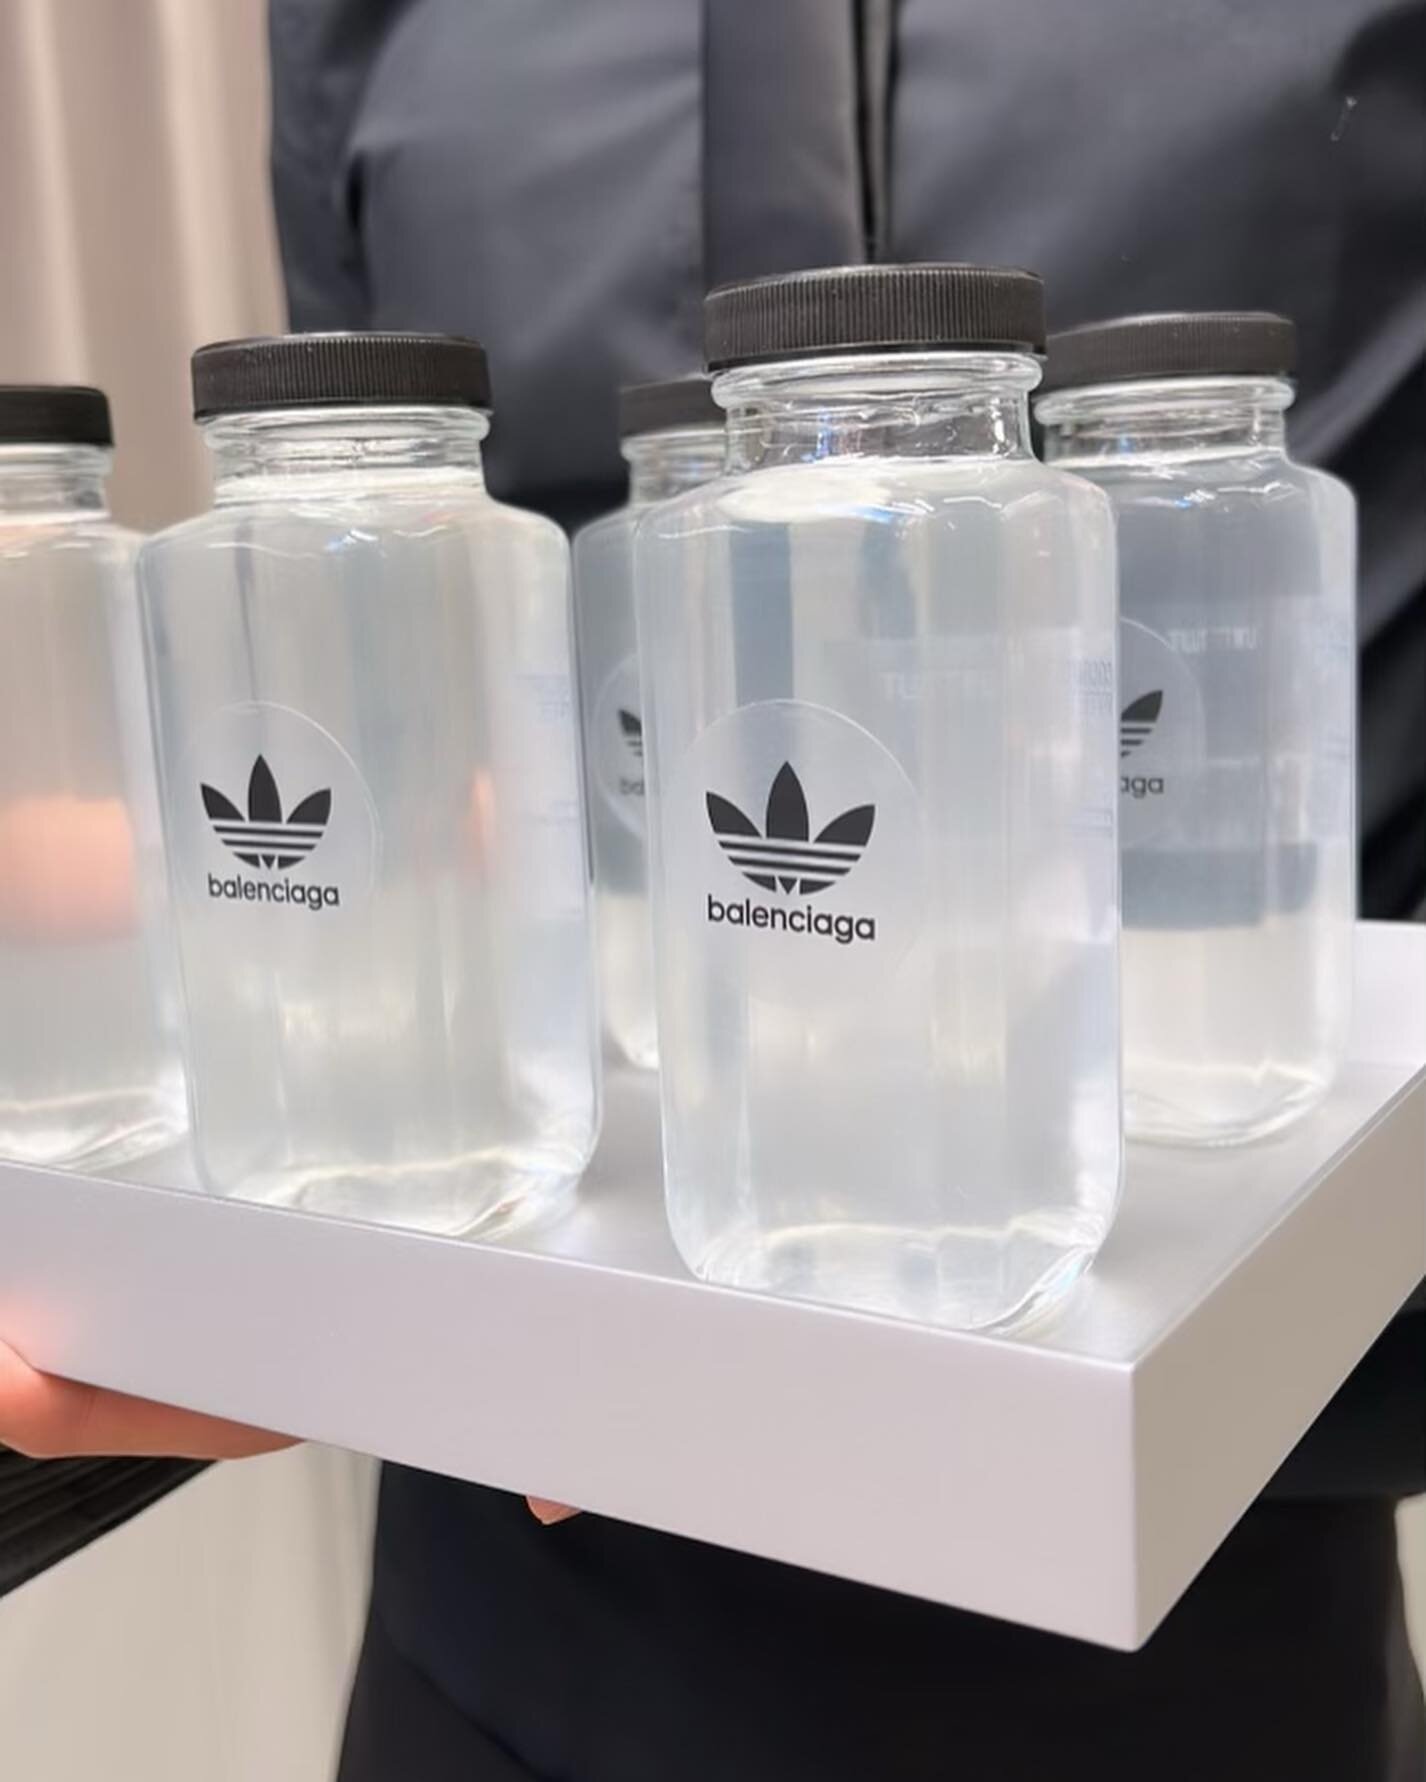 Balenciaga x adidas collab is here and so is our catering for them.
*
*
*
*
#brandactivation #brandactivationservices #eventcatering #eventcaterer #brooklyncatering #brooklyncaterer #womenownedbusiness #catering #goodfood #brandcollaboration #balenci